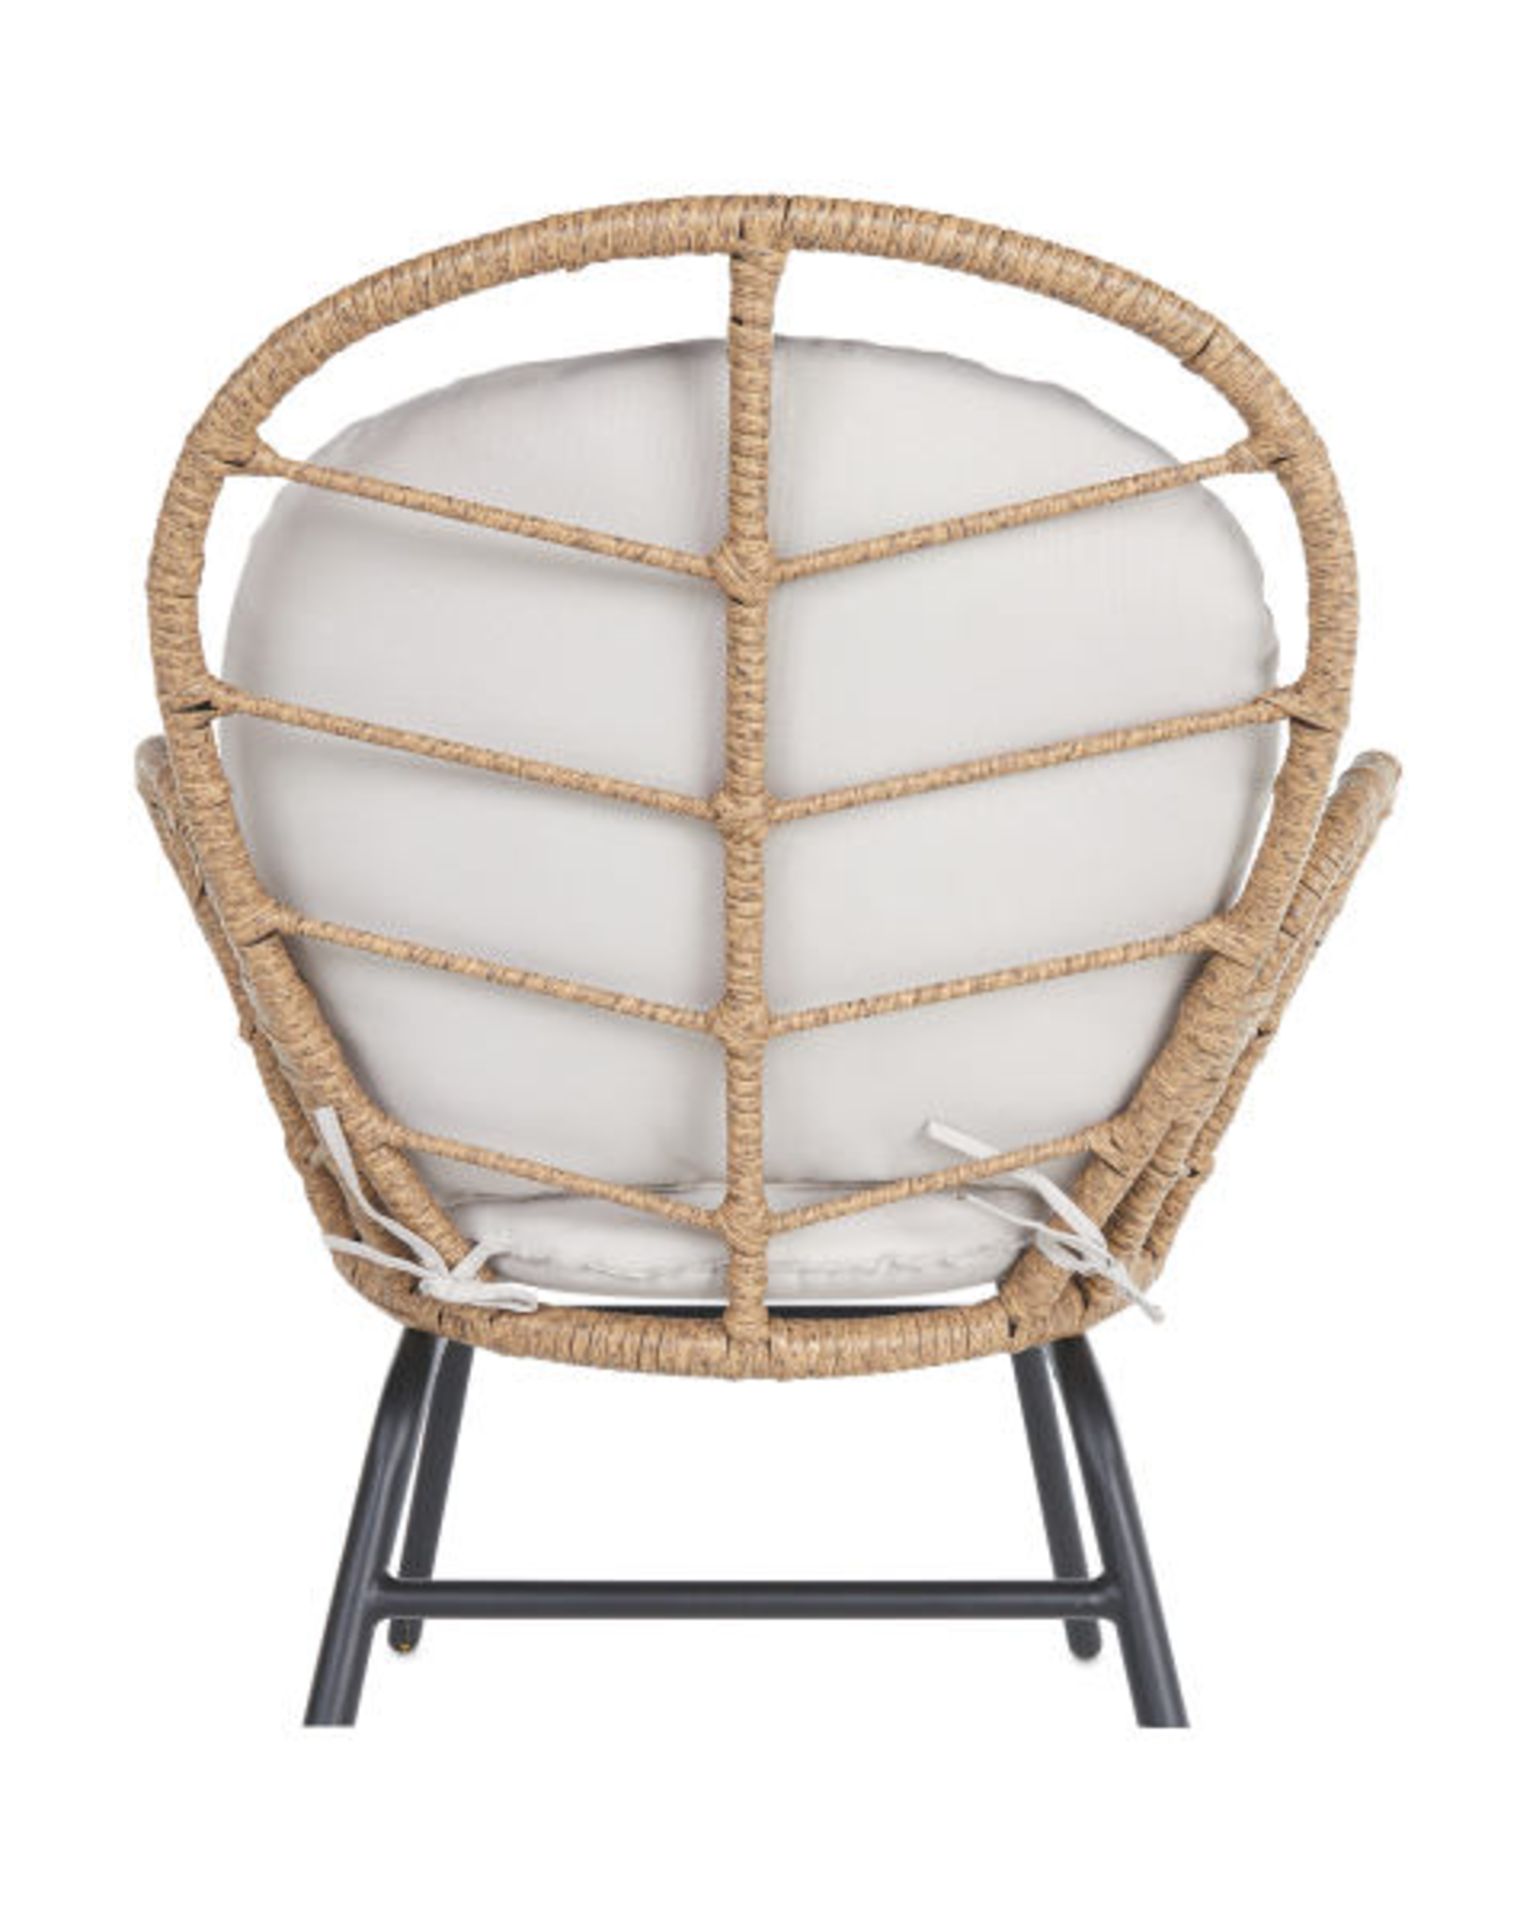 Luxury Petal Rattan Bistro Set. Transform your garden and create a space where you can relax with - Image 5 of 6